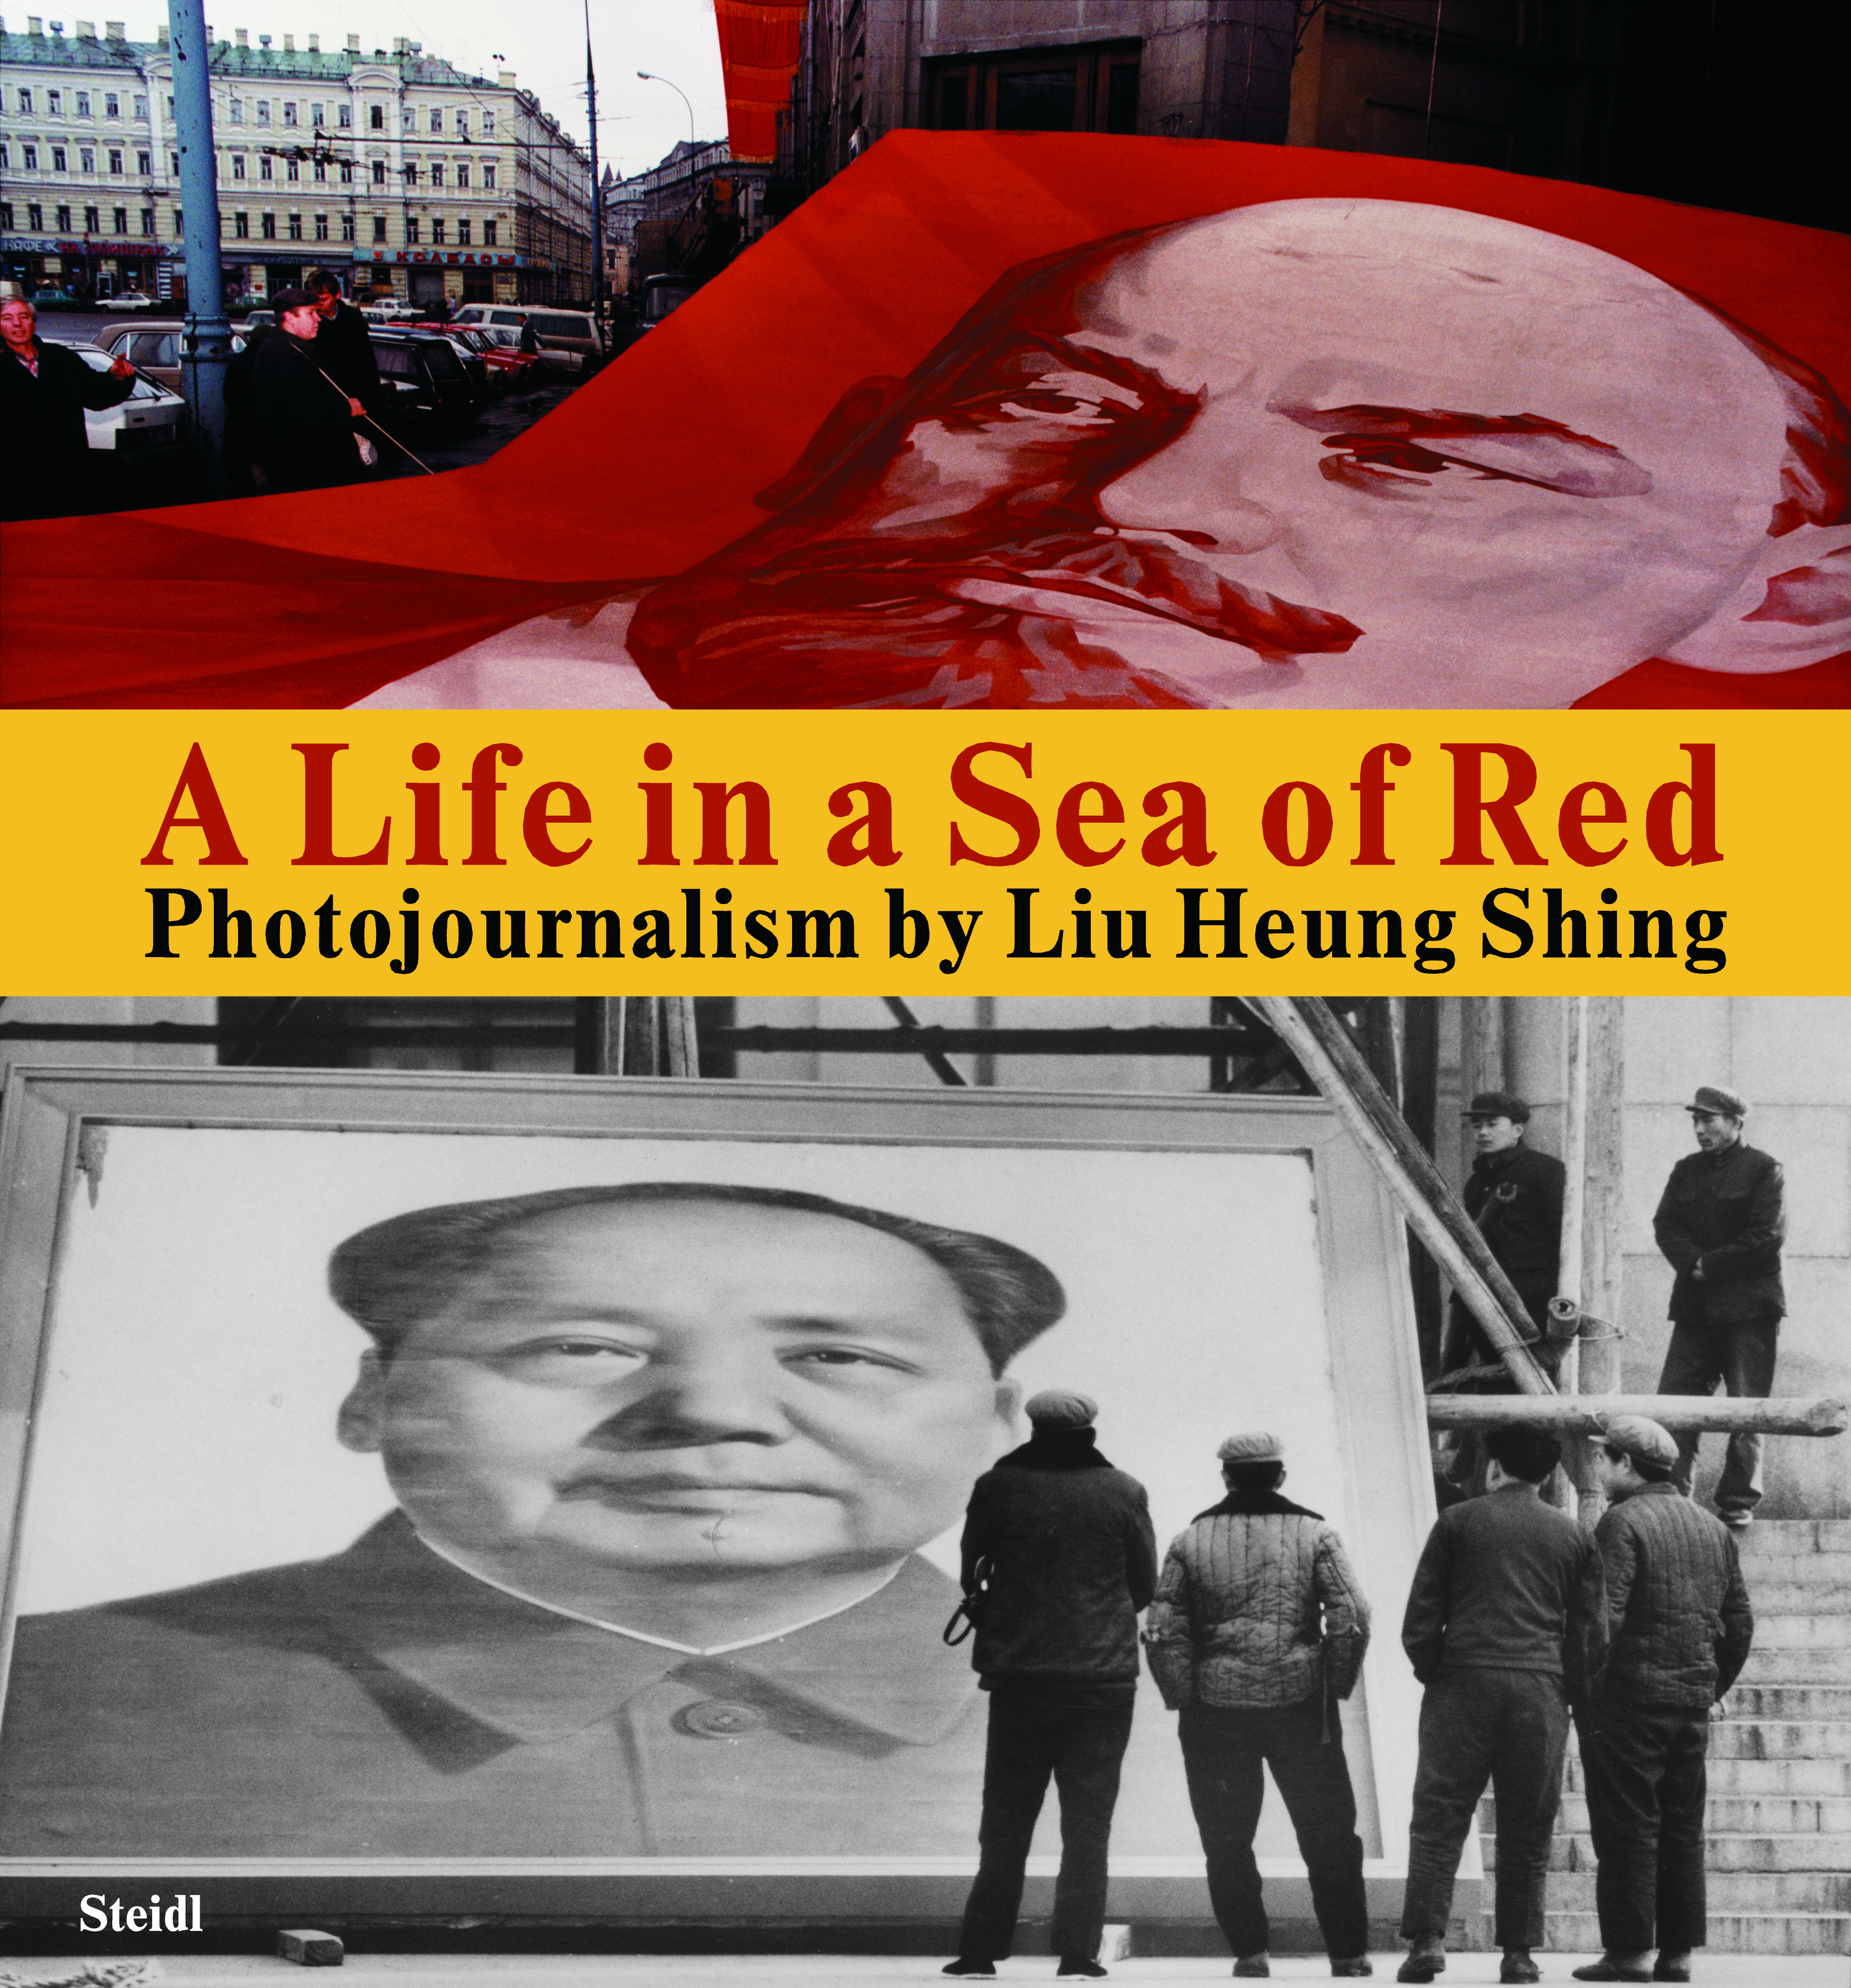 The cover of Liu Heung Shing's new book featuring his photographs of China and Russia from 1976 to 2016. (Courtesy of Liu Heung Shing)